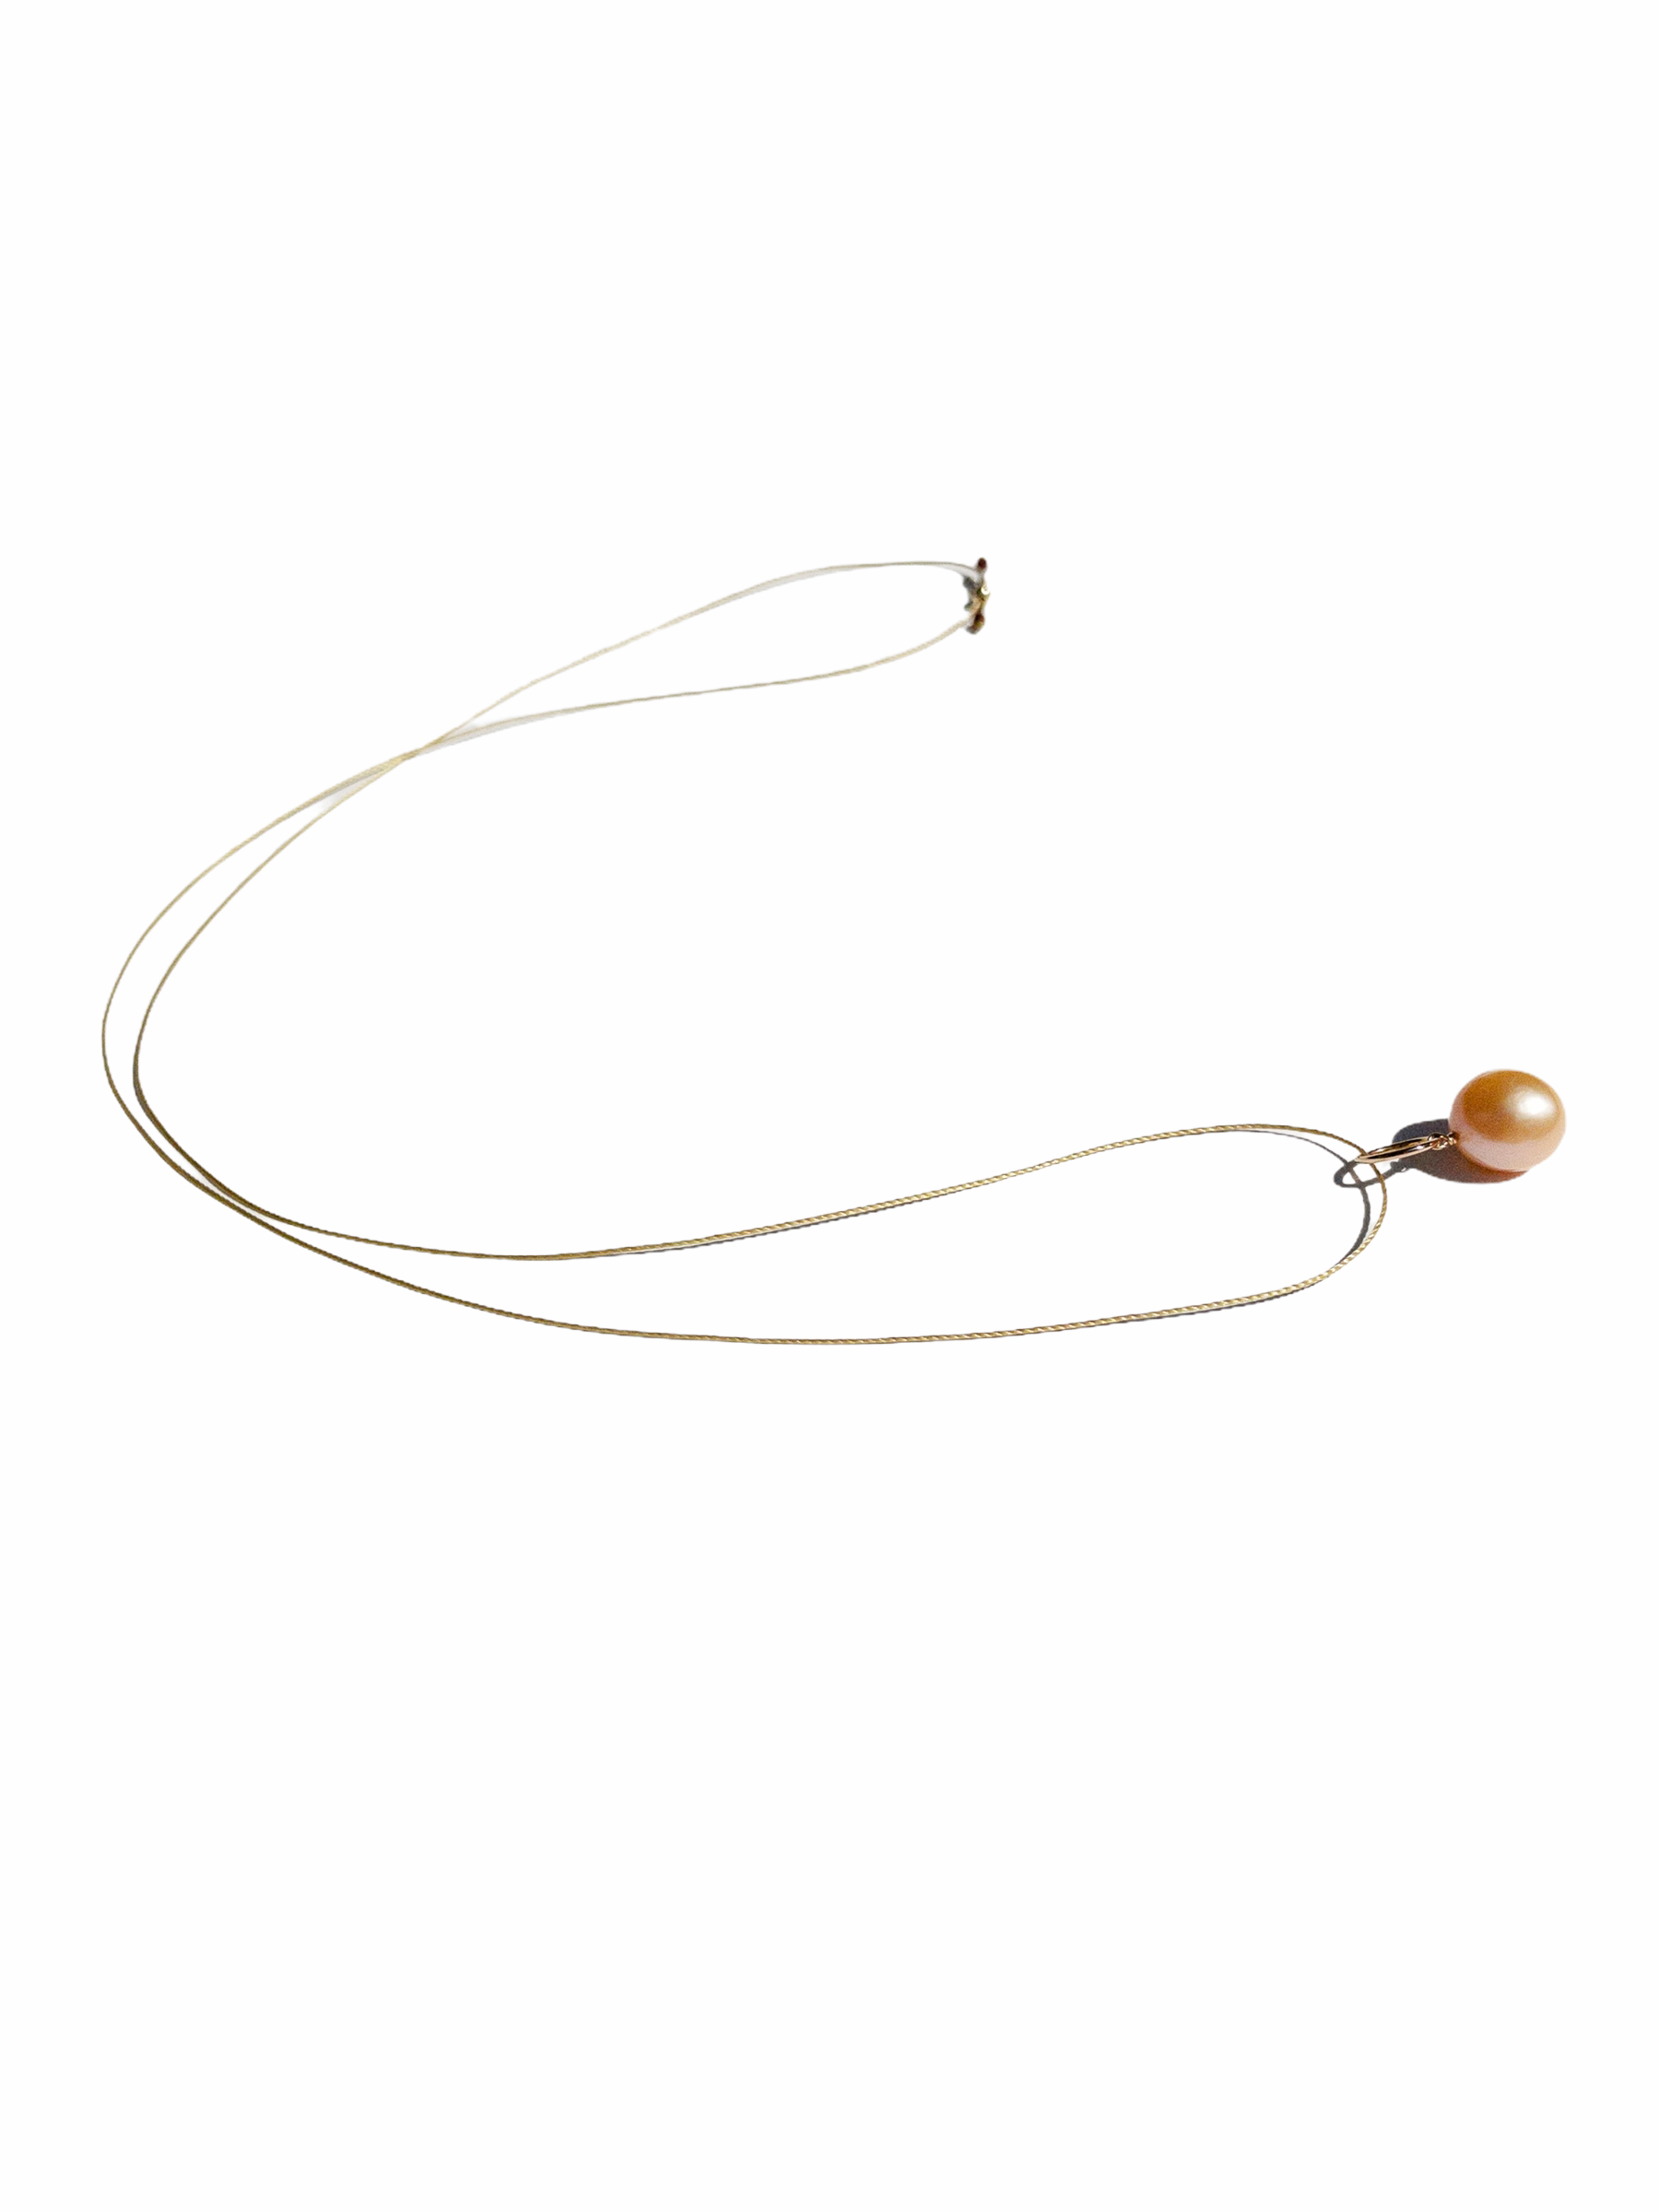 Stellar Necklace with Freshwater Baroque Pearl on Nylon String